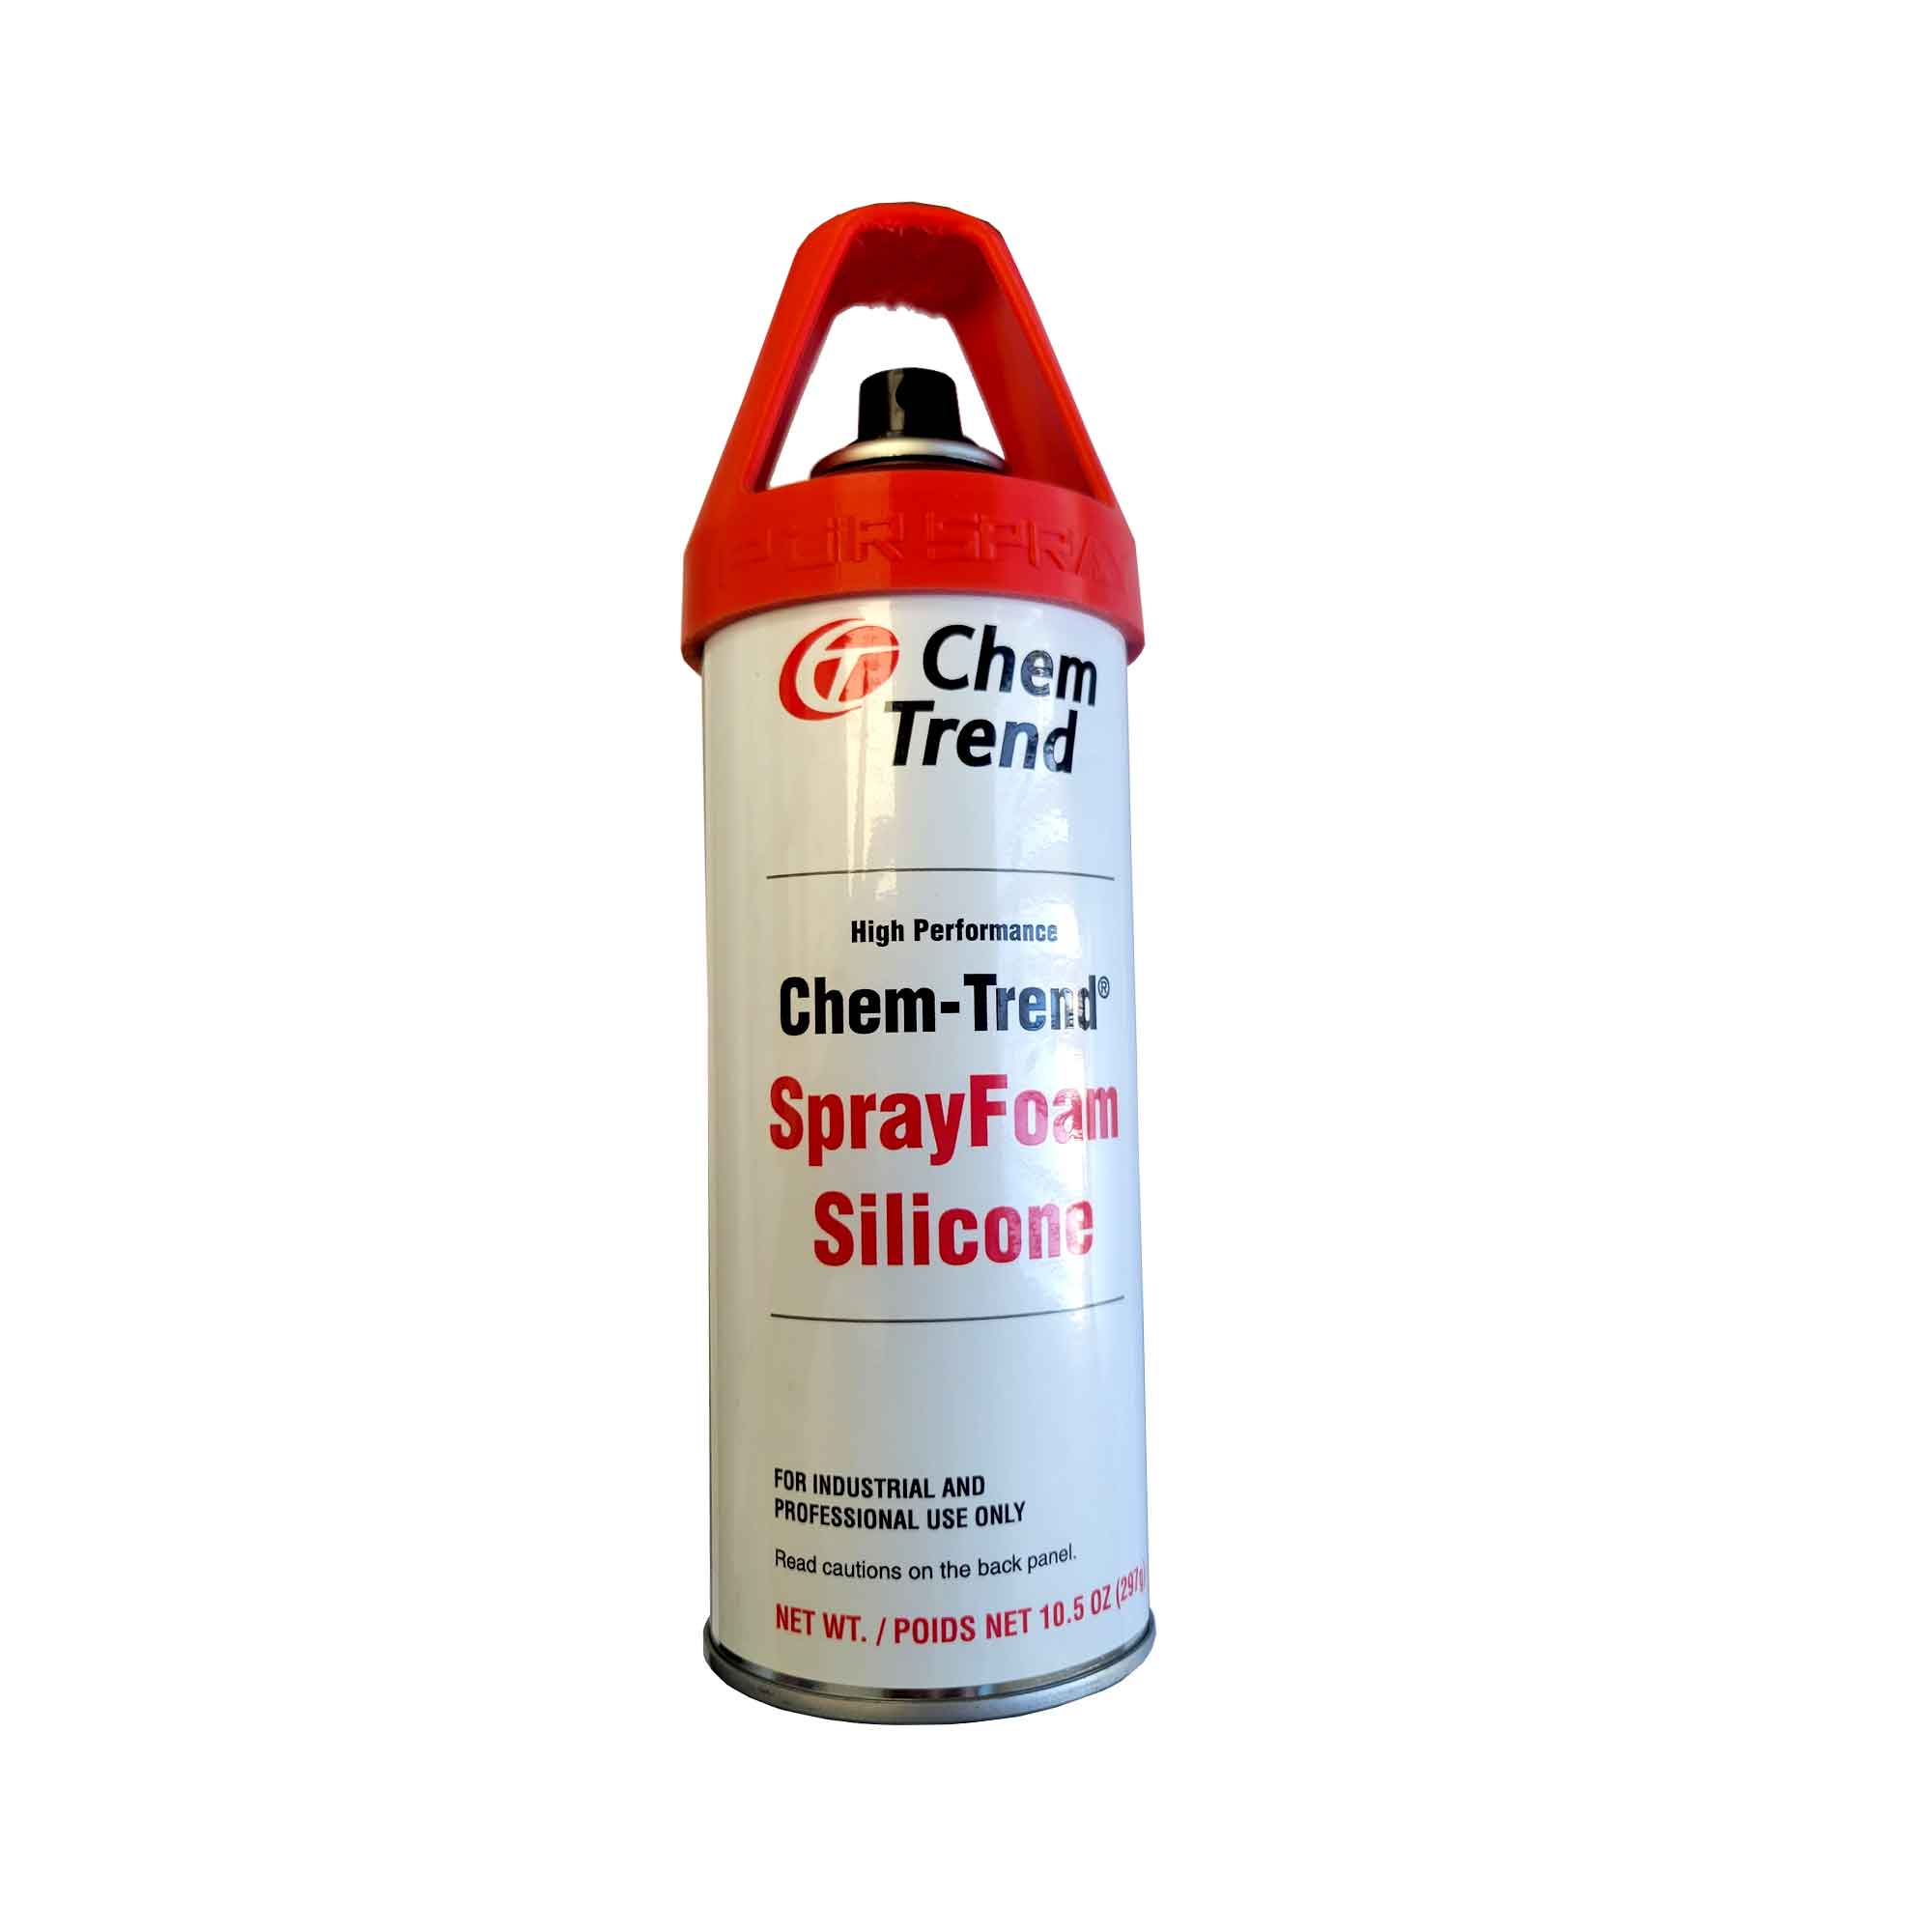 Chem-Trend Spray Foam Silicone Release (one can)